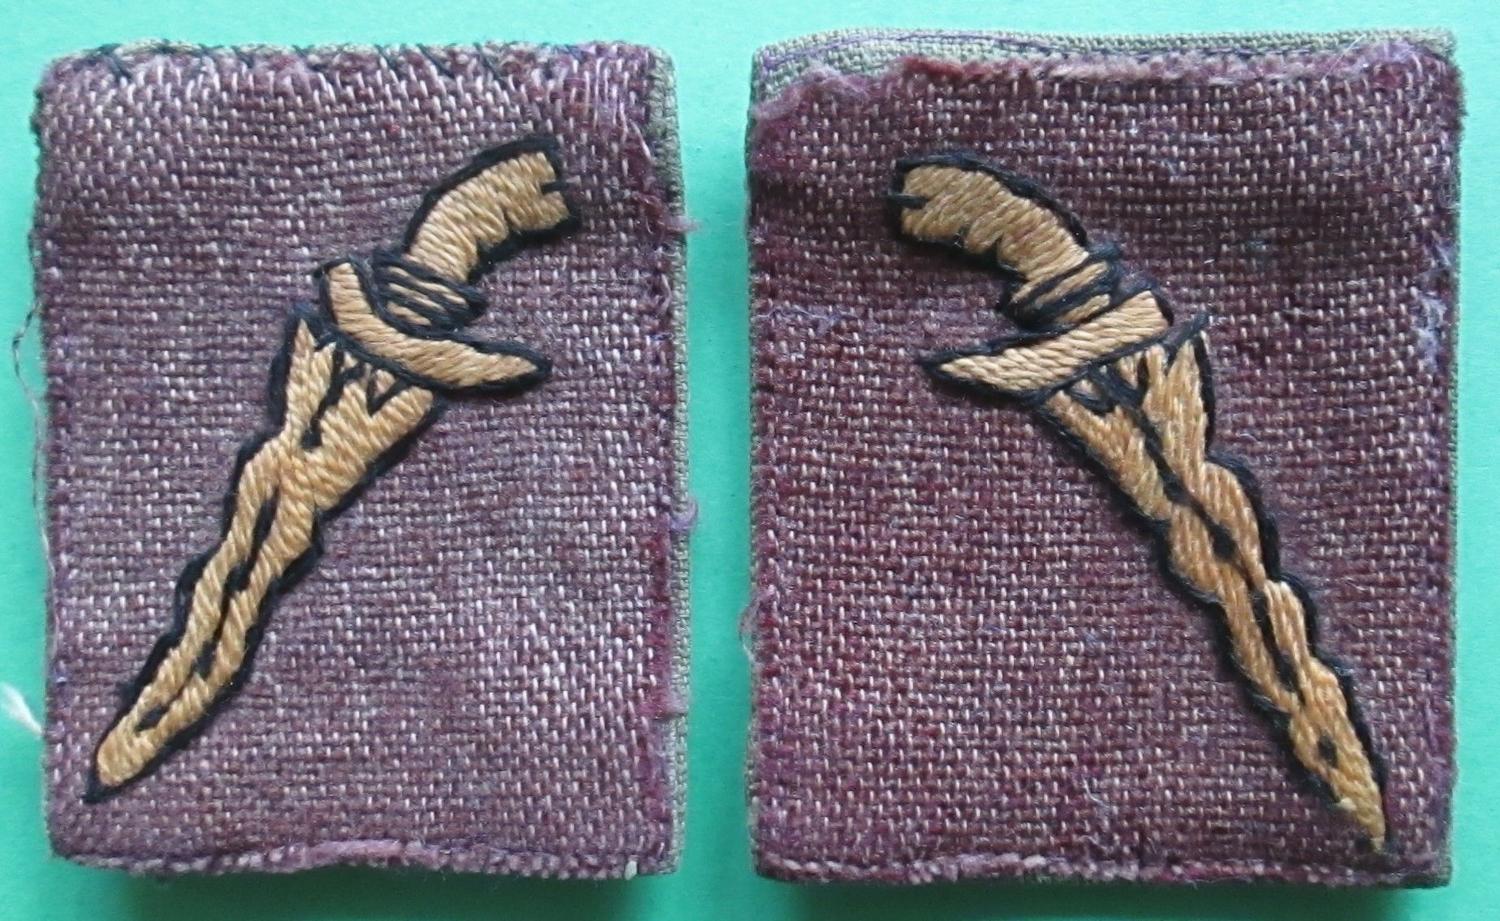 A MATCHING PAIR OF THE MALAYA COMMAND FORMATION PATCHES